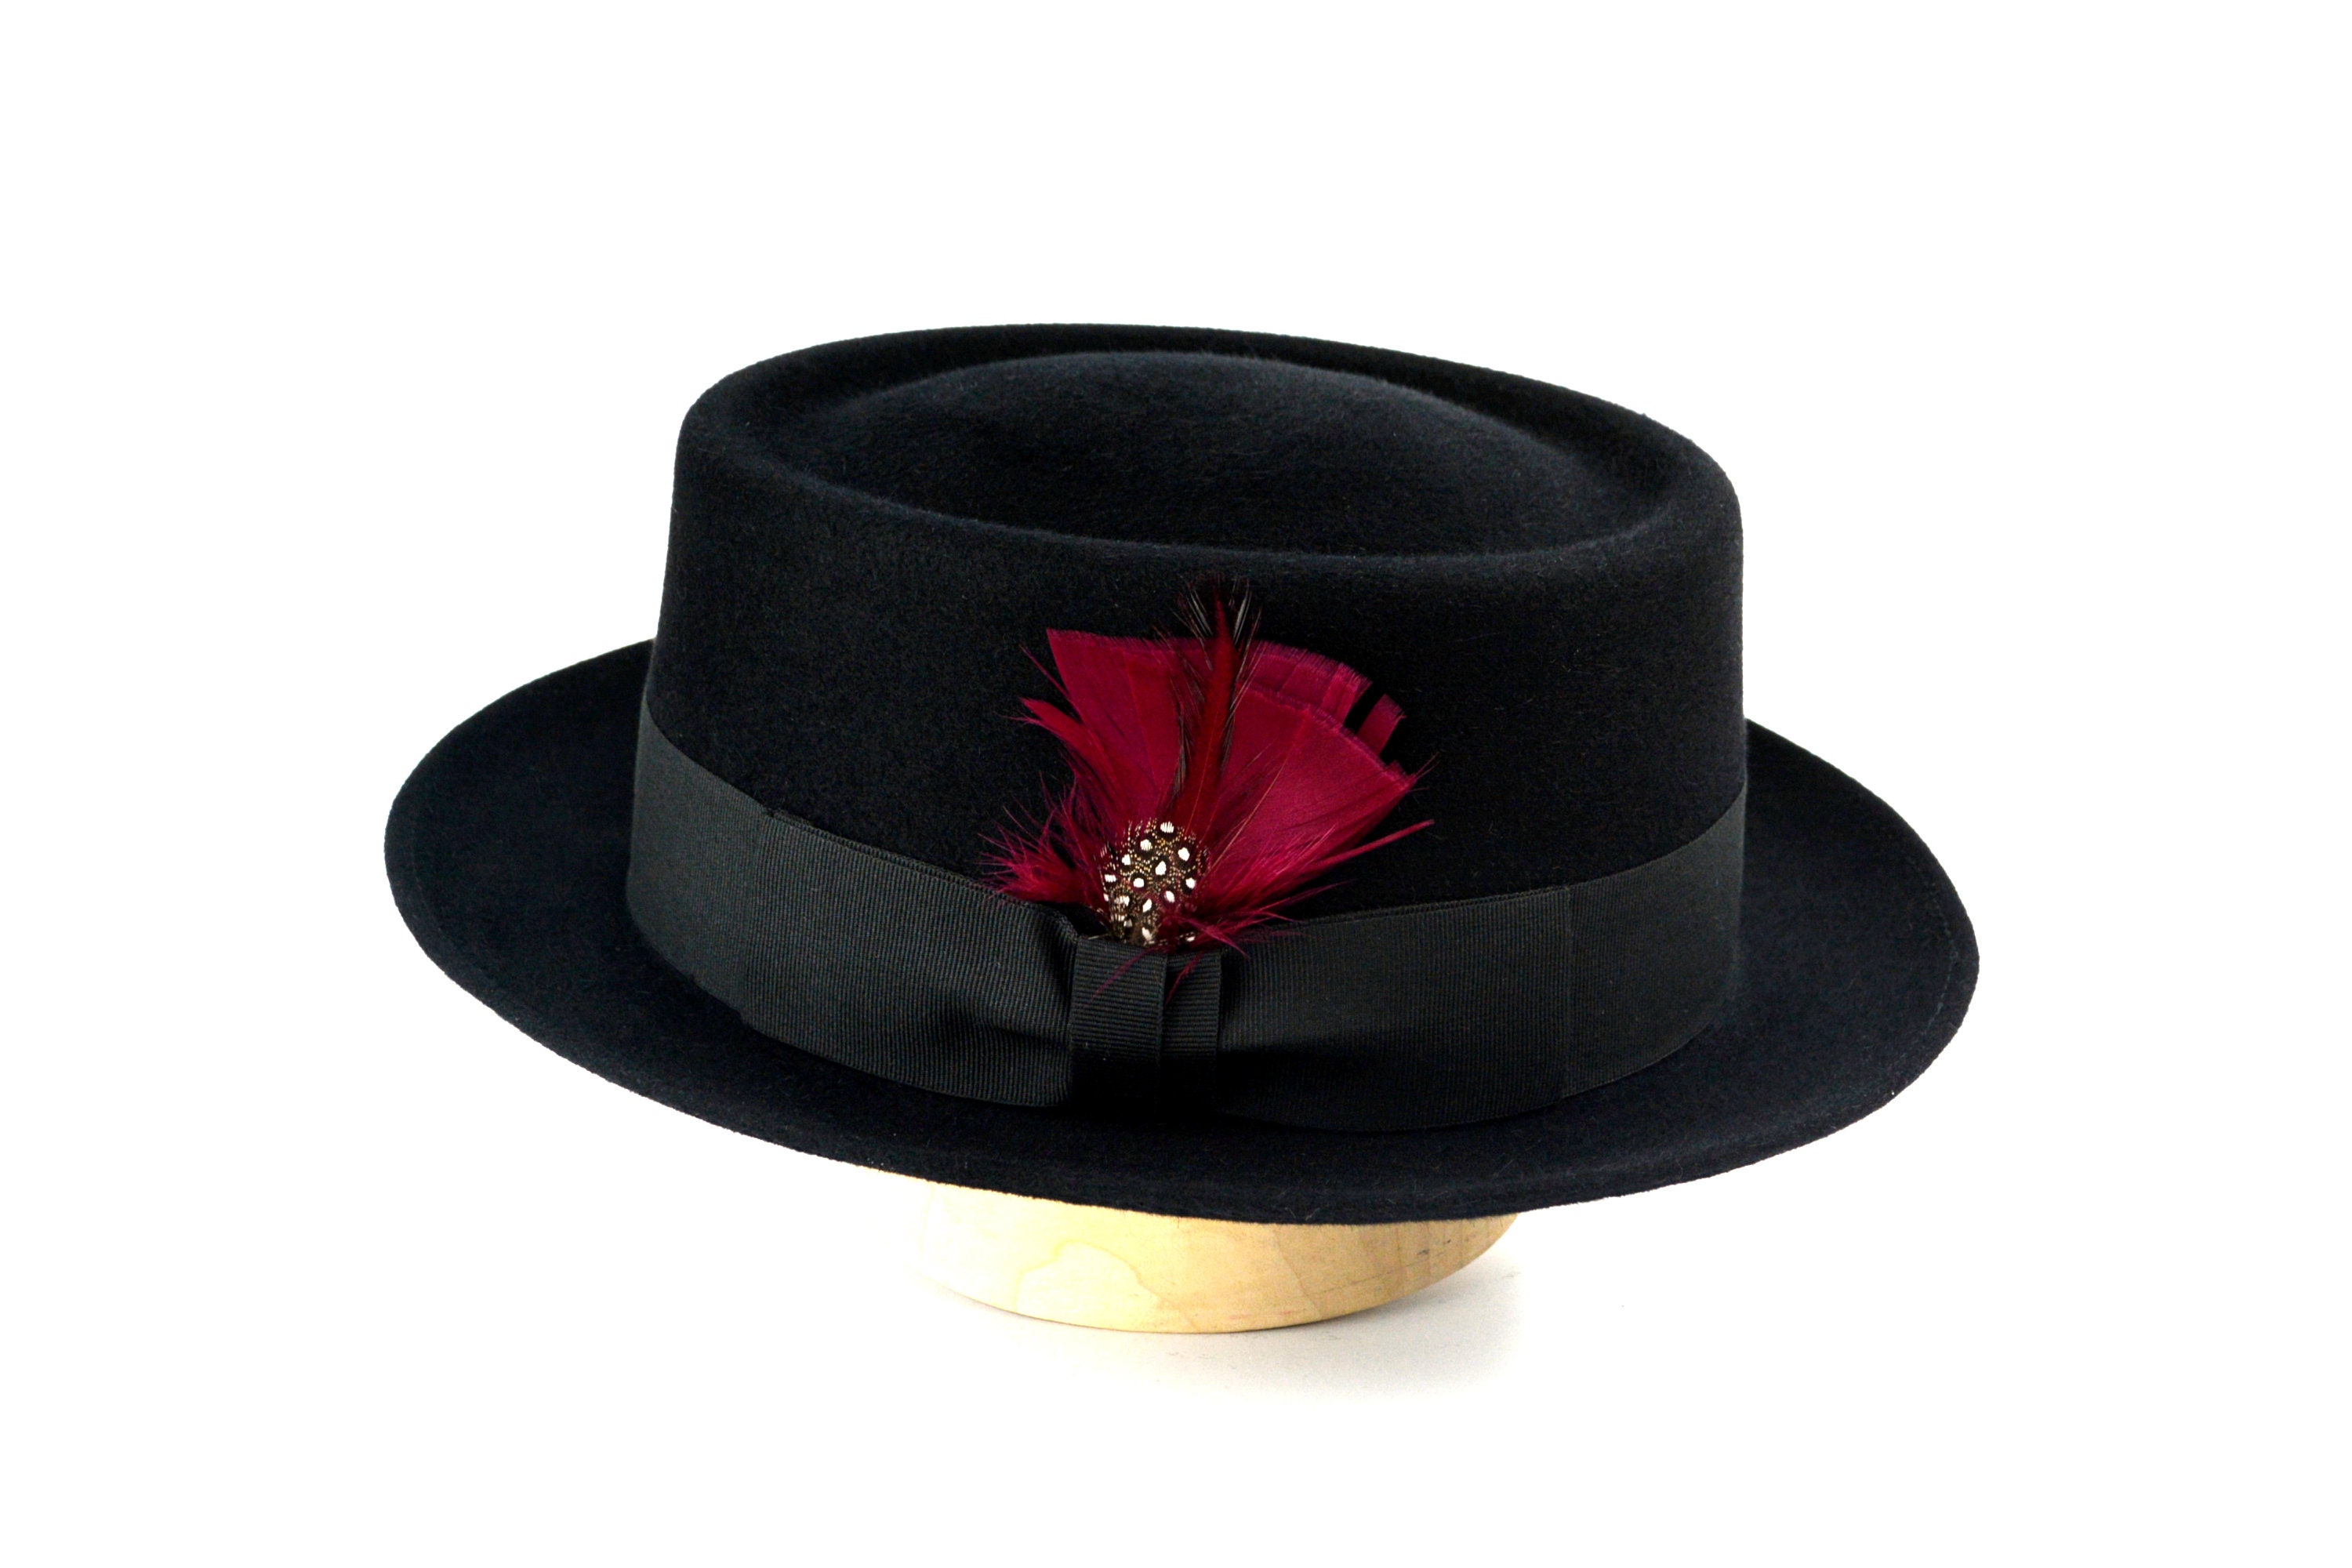 Black Pork Pie Costume Hat with Feather 